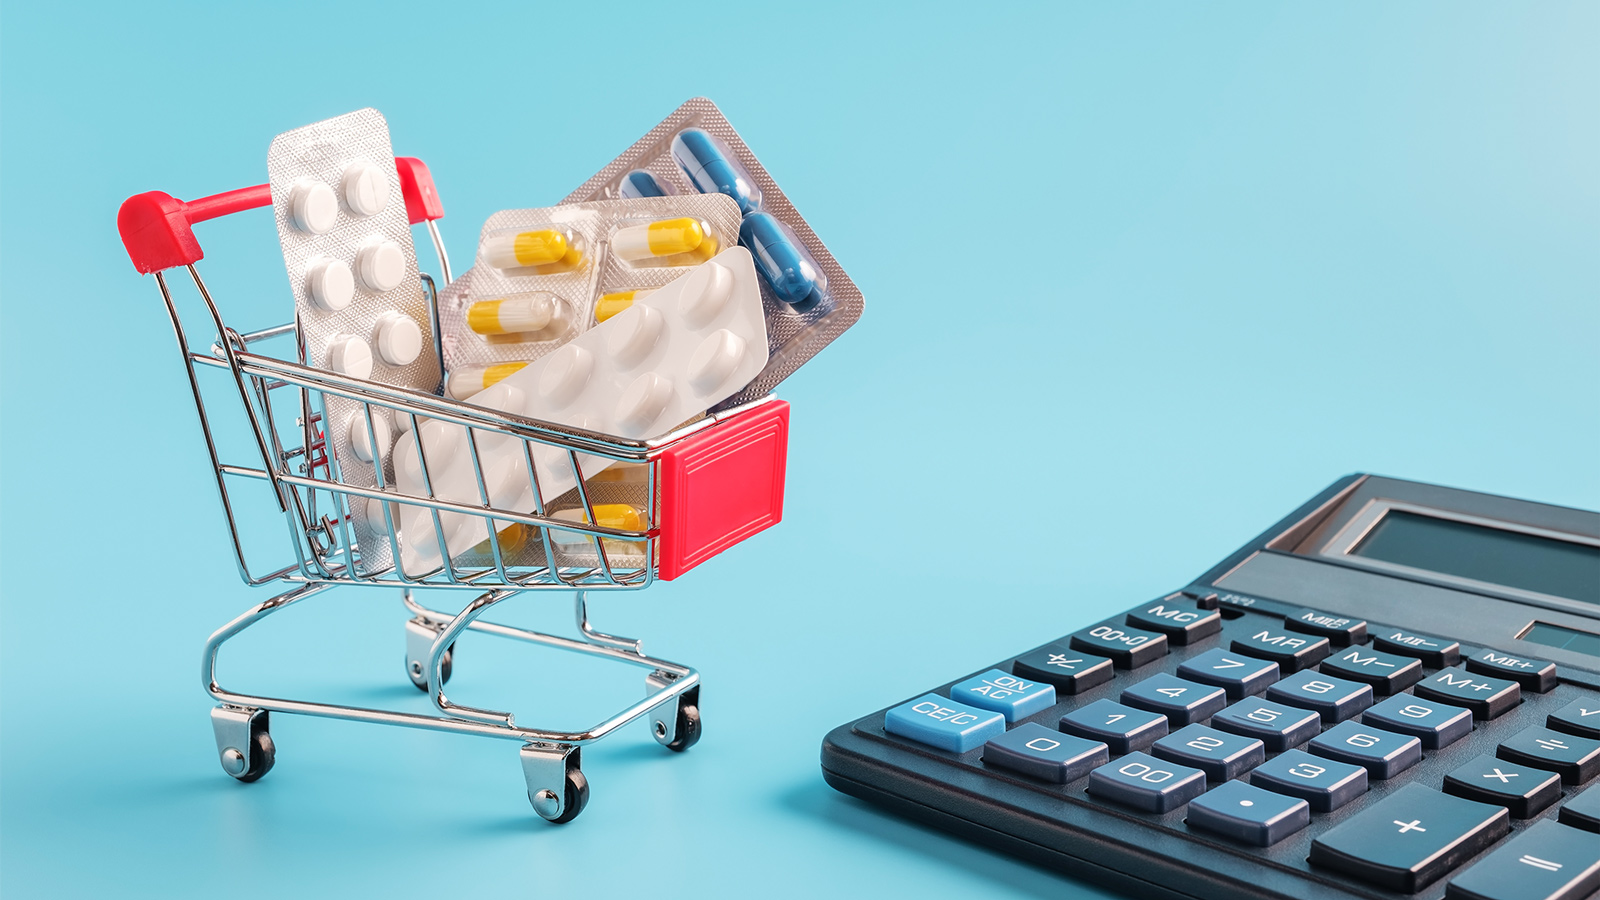 Mini shopping cart filled with medication and a calculator on baby blue background